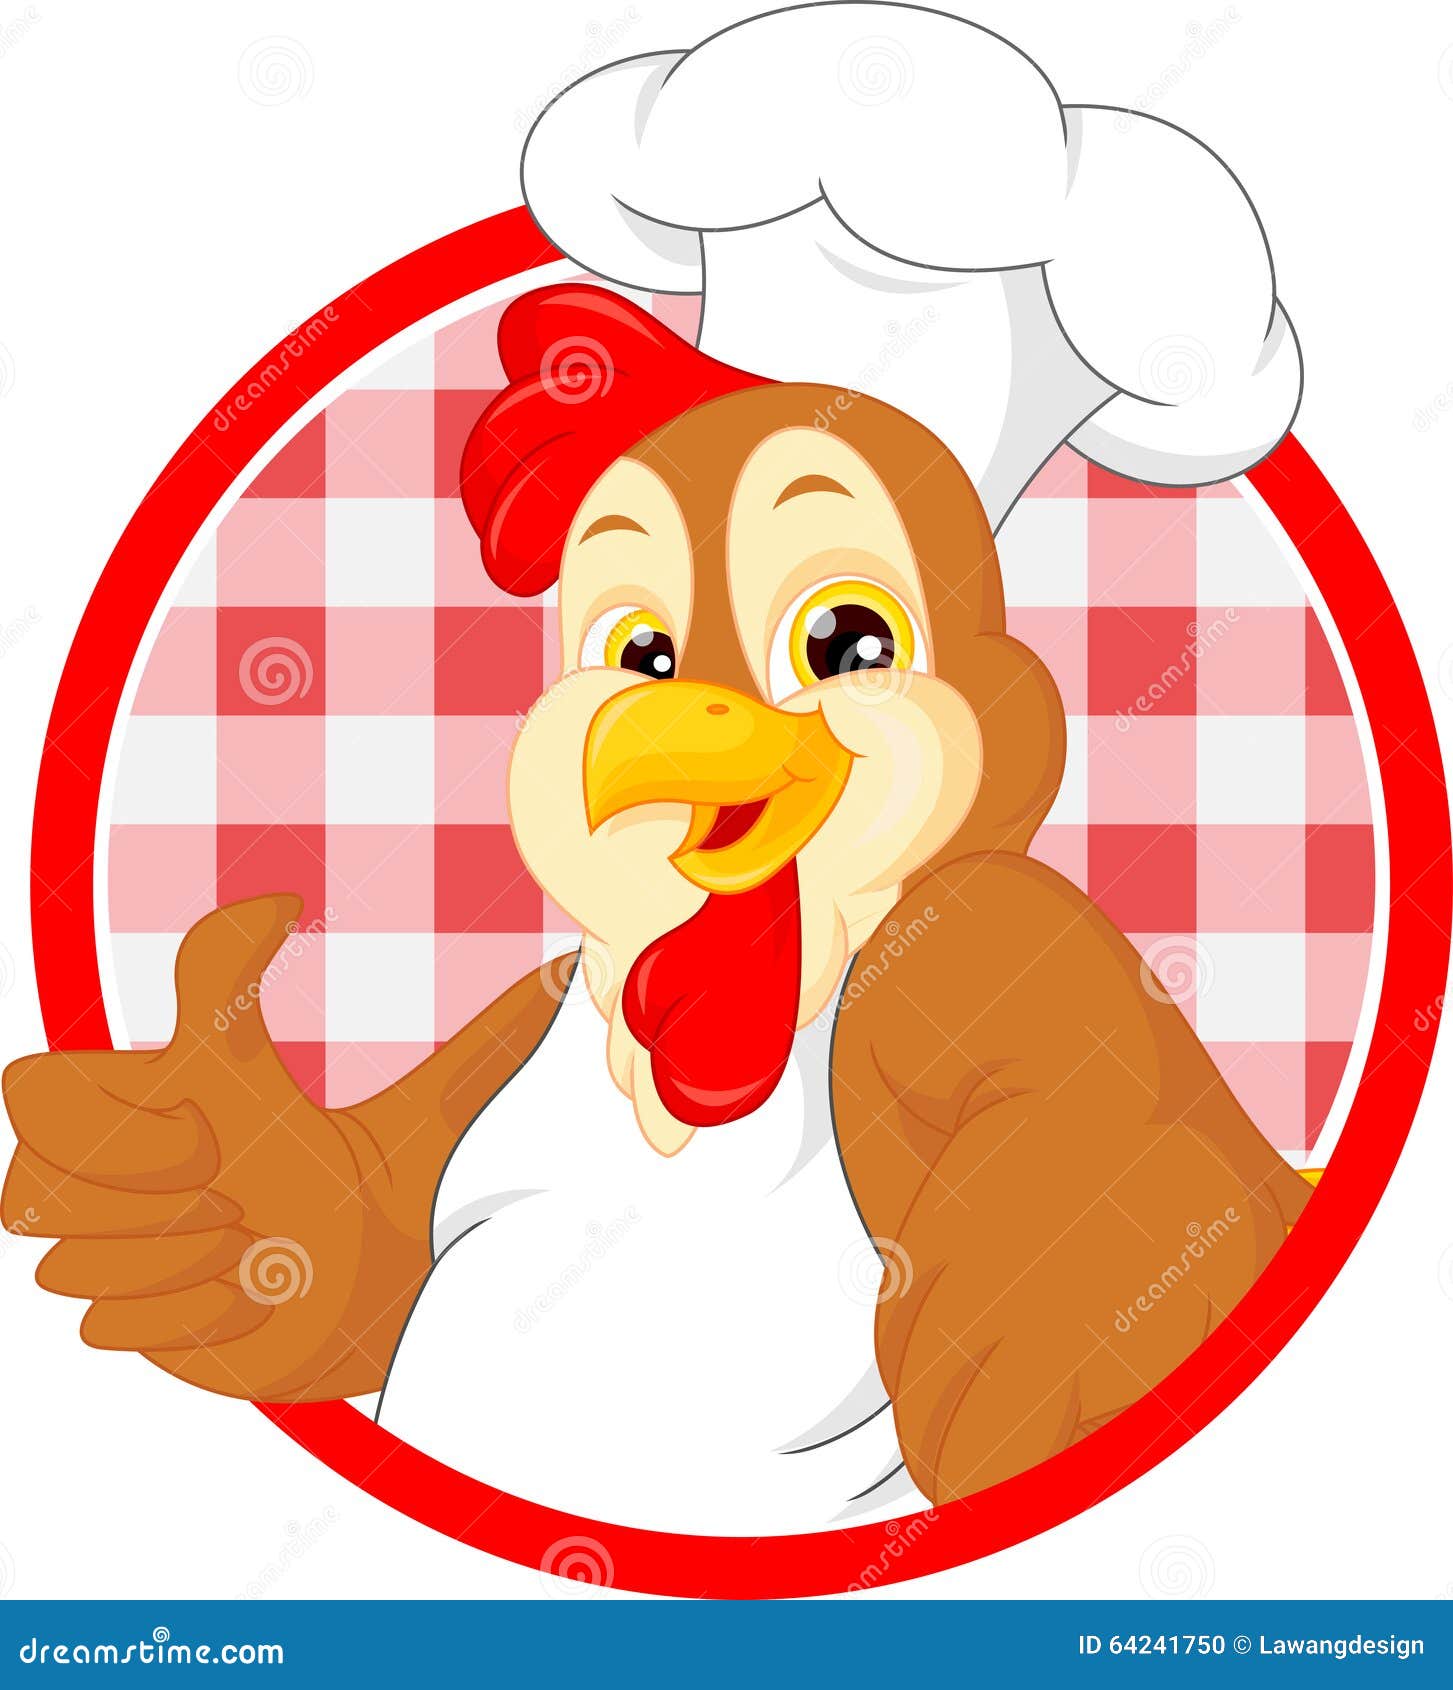 rooster mascot clipart - photo #26